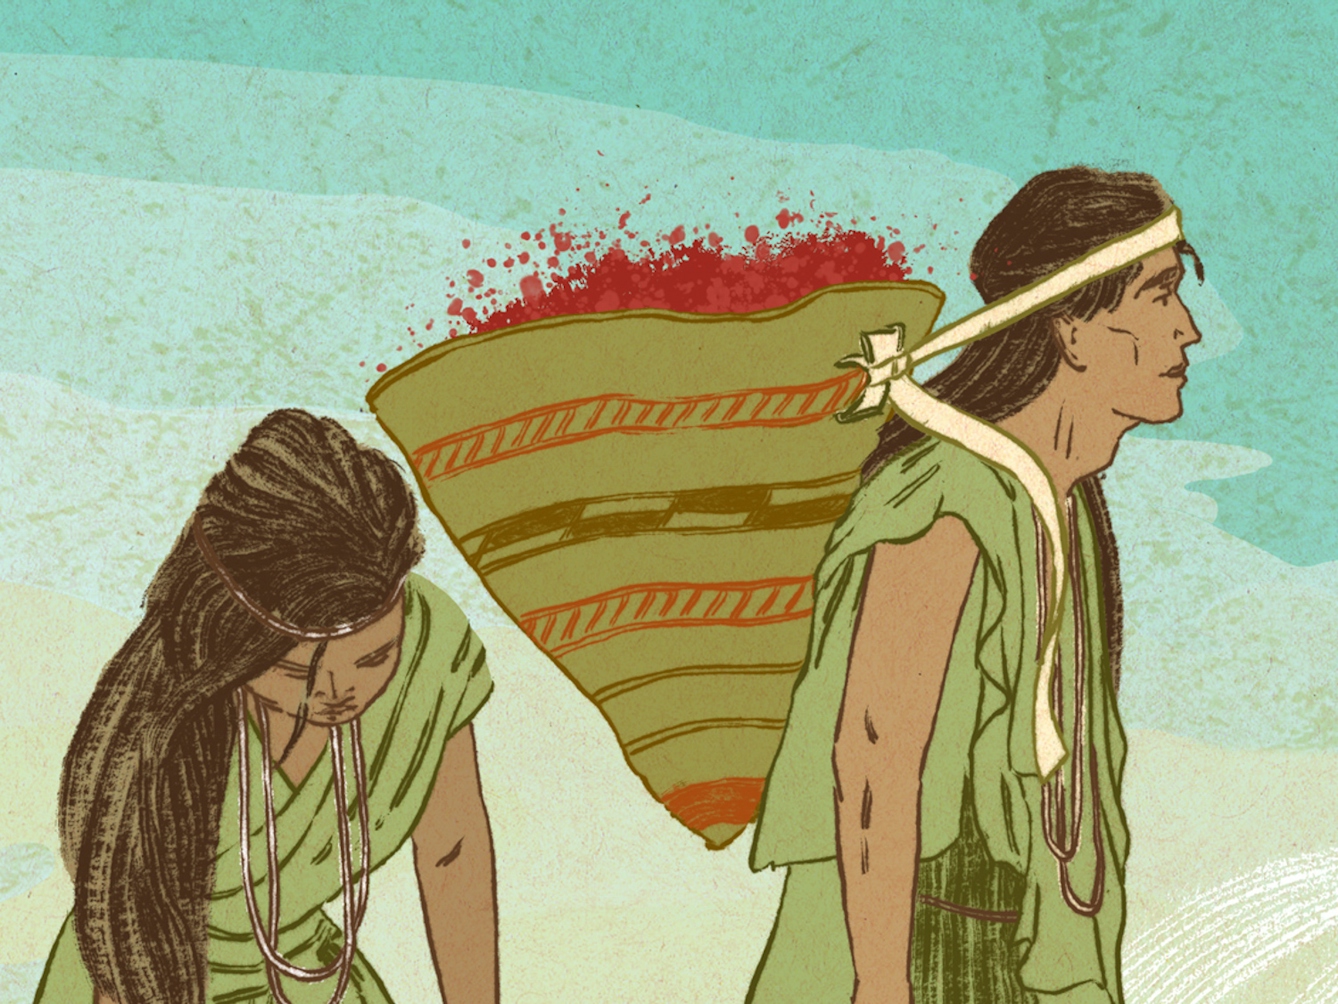 A digital illustration depicting a man and a woman in a landscape scene. The people are Native Americans. The woman is looking down and the male is looking over to the right and is carrying a conical basket on his back full of red berries.